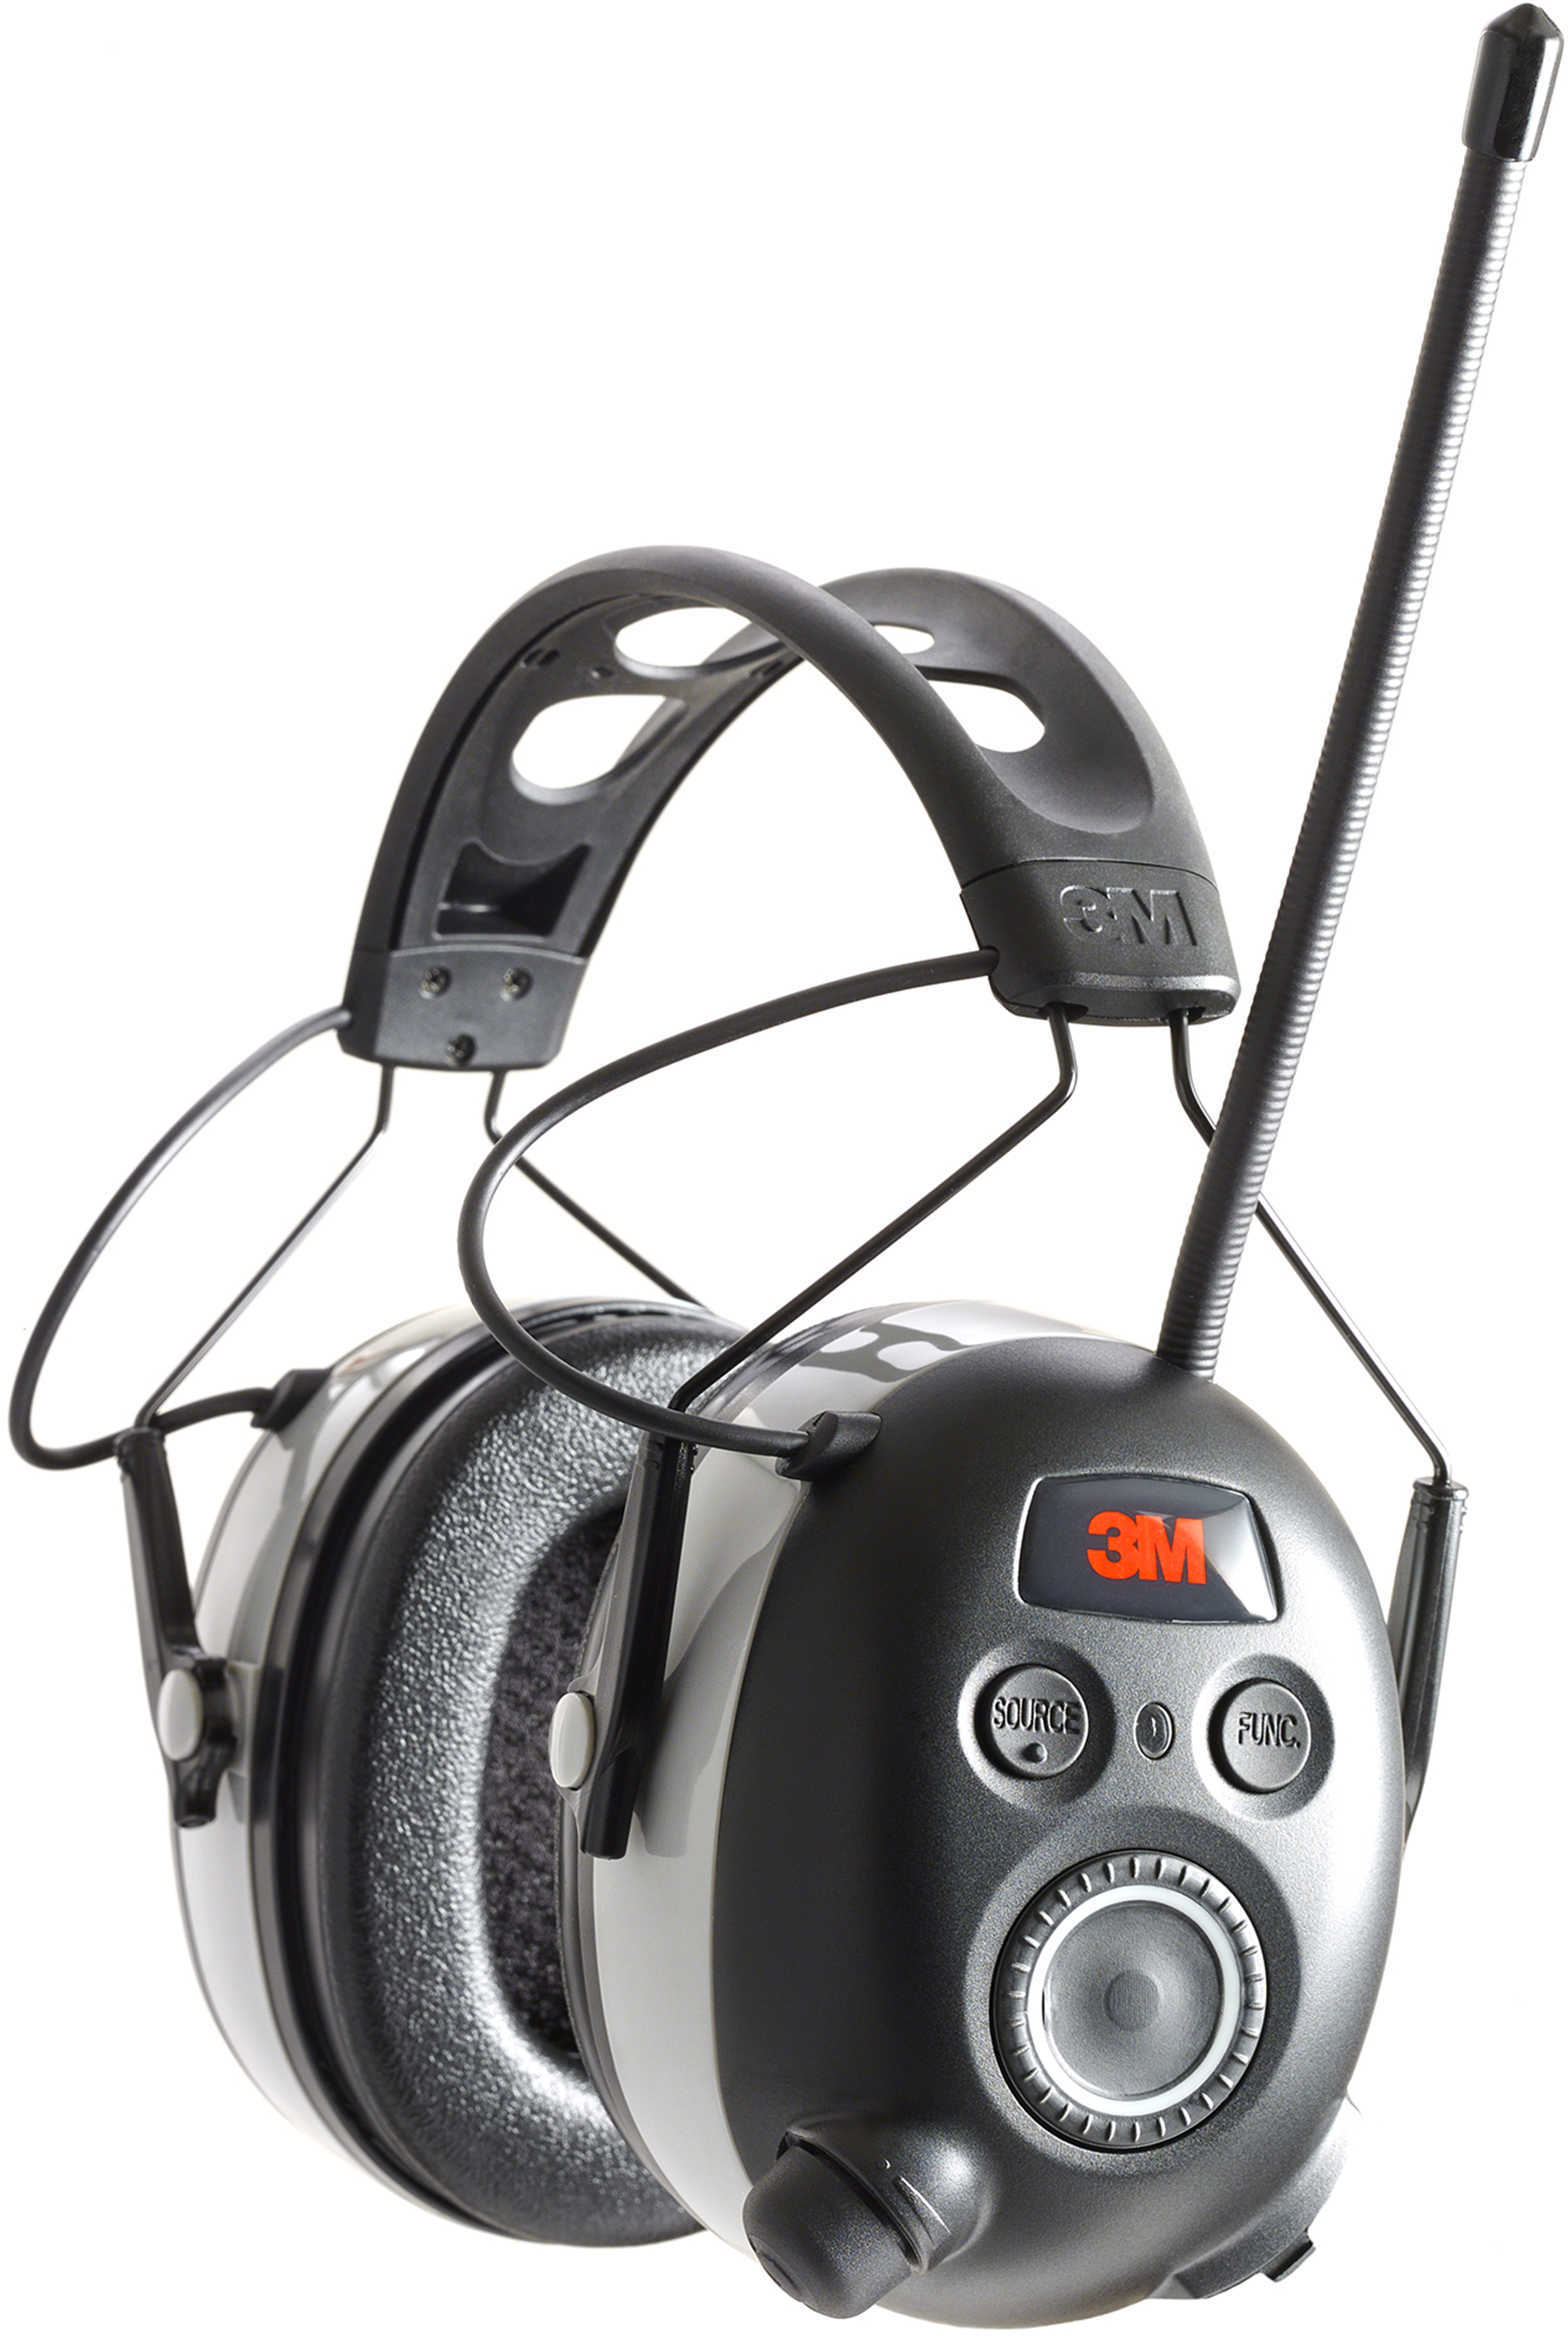 Peltor Work Tunes Wireless Hearing Protector With Bluetooth Technology, Black Md: 90542-3DC